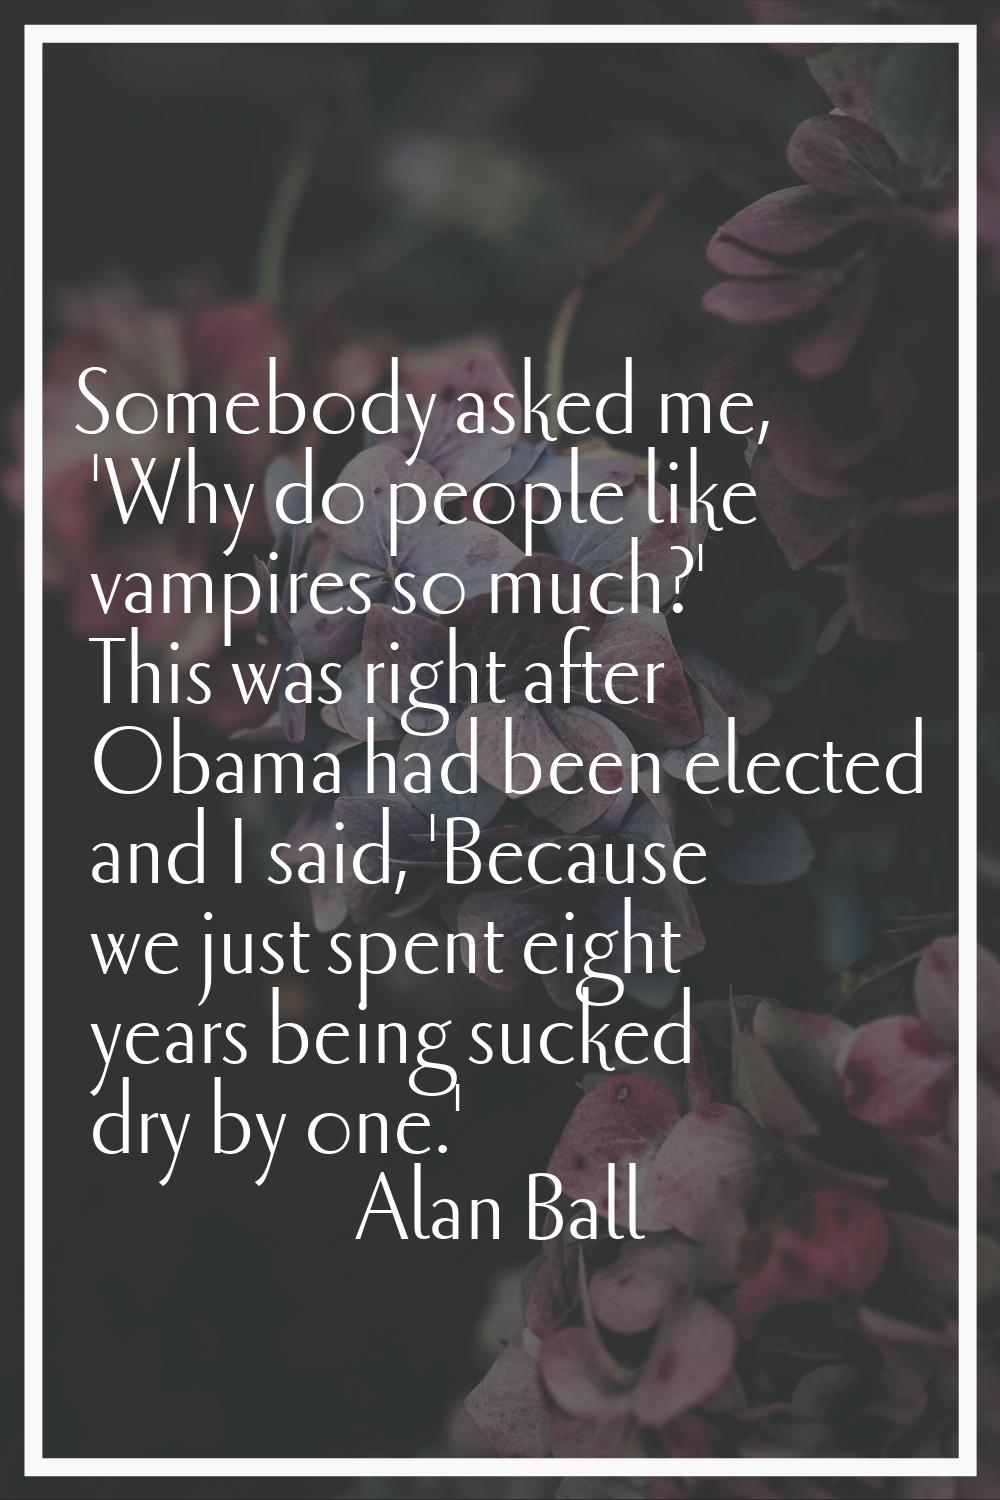 Somebody asked me, 'Why do people like vampires so much?' This was right after Obama had been elect